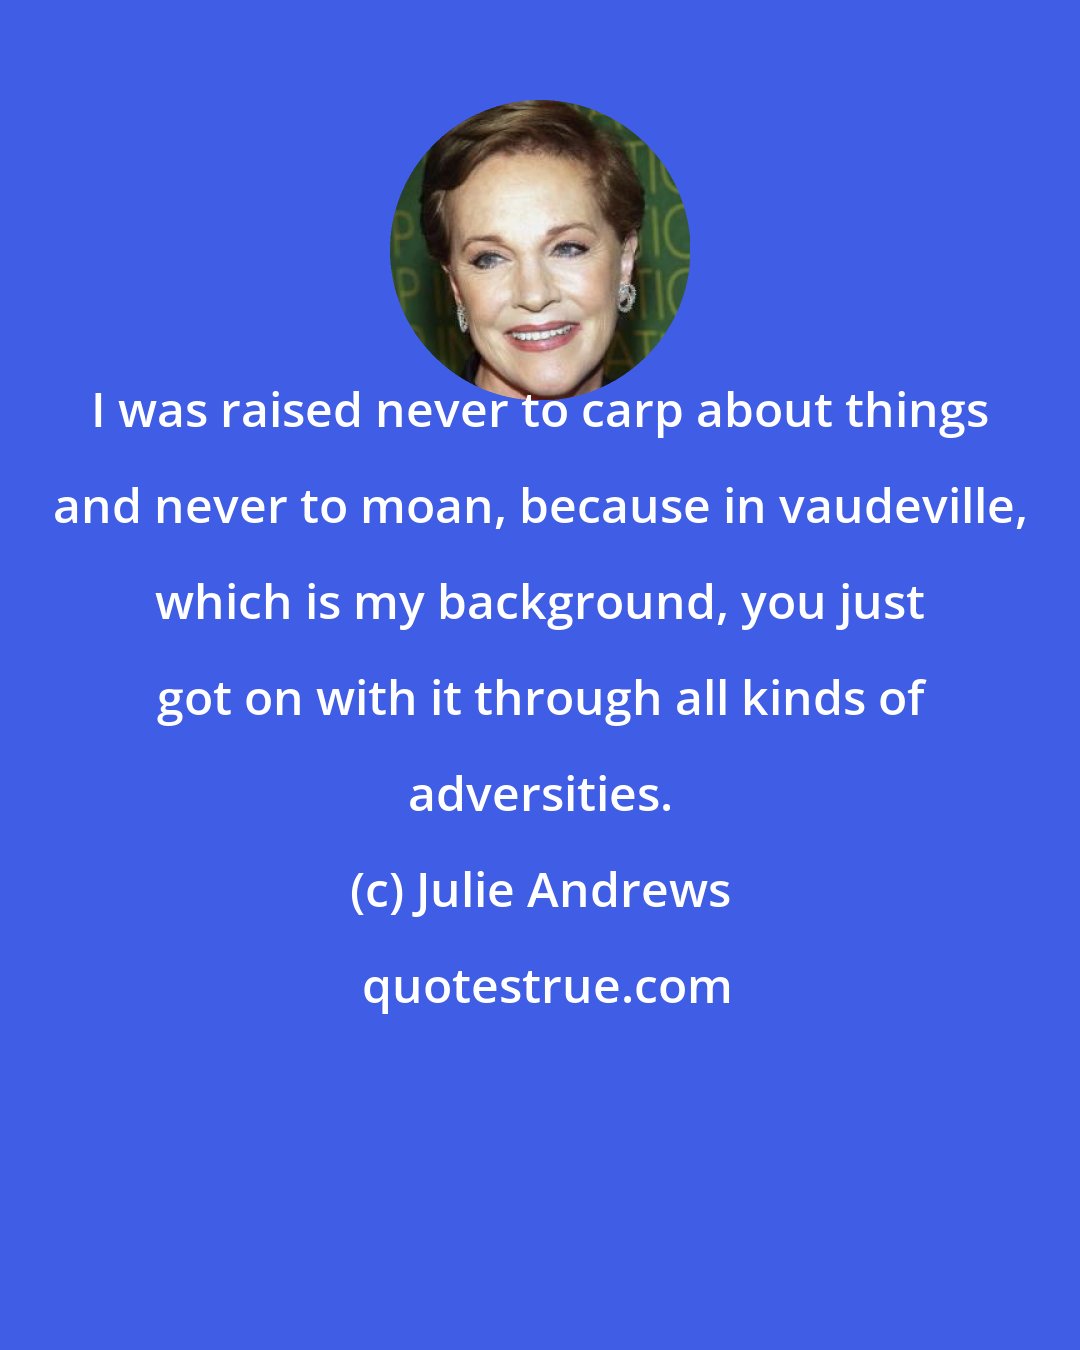 Julie Andrews: I was raised never to carp about things and never to moan, because in vaudeville, which is my background, you just got on with it through all kinds of adversities.